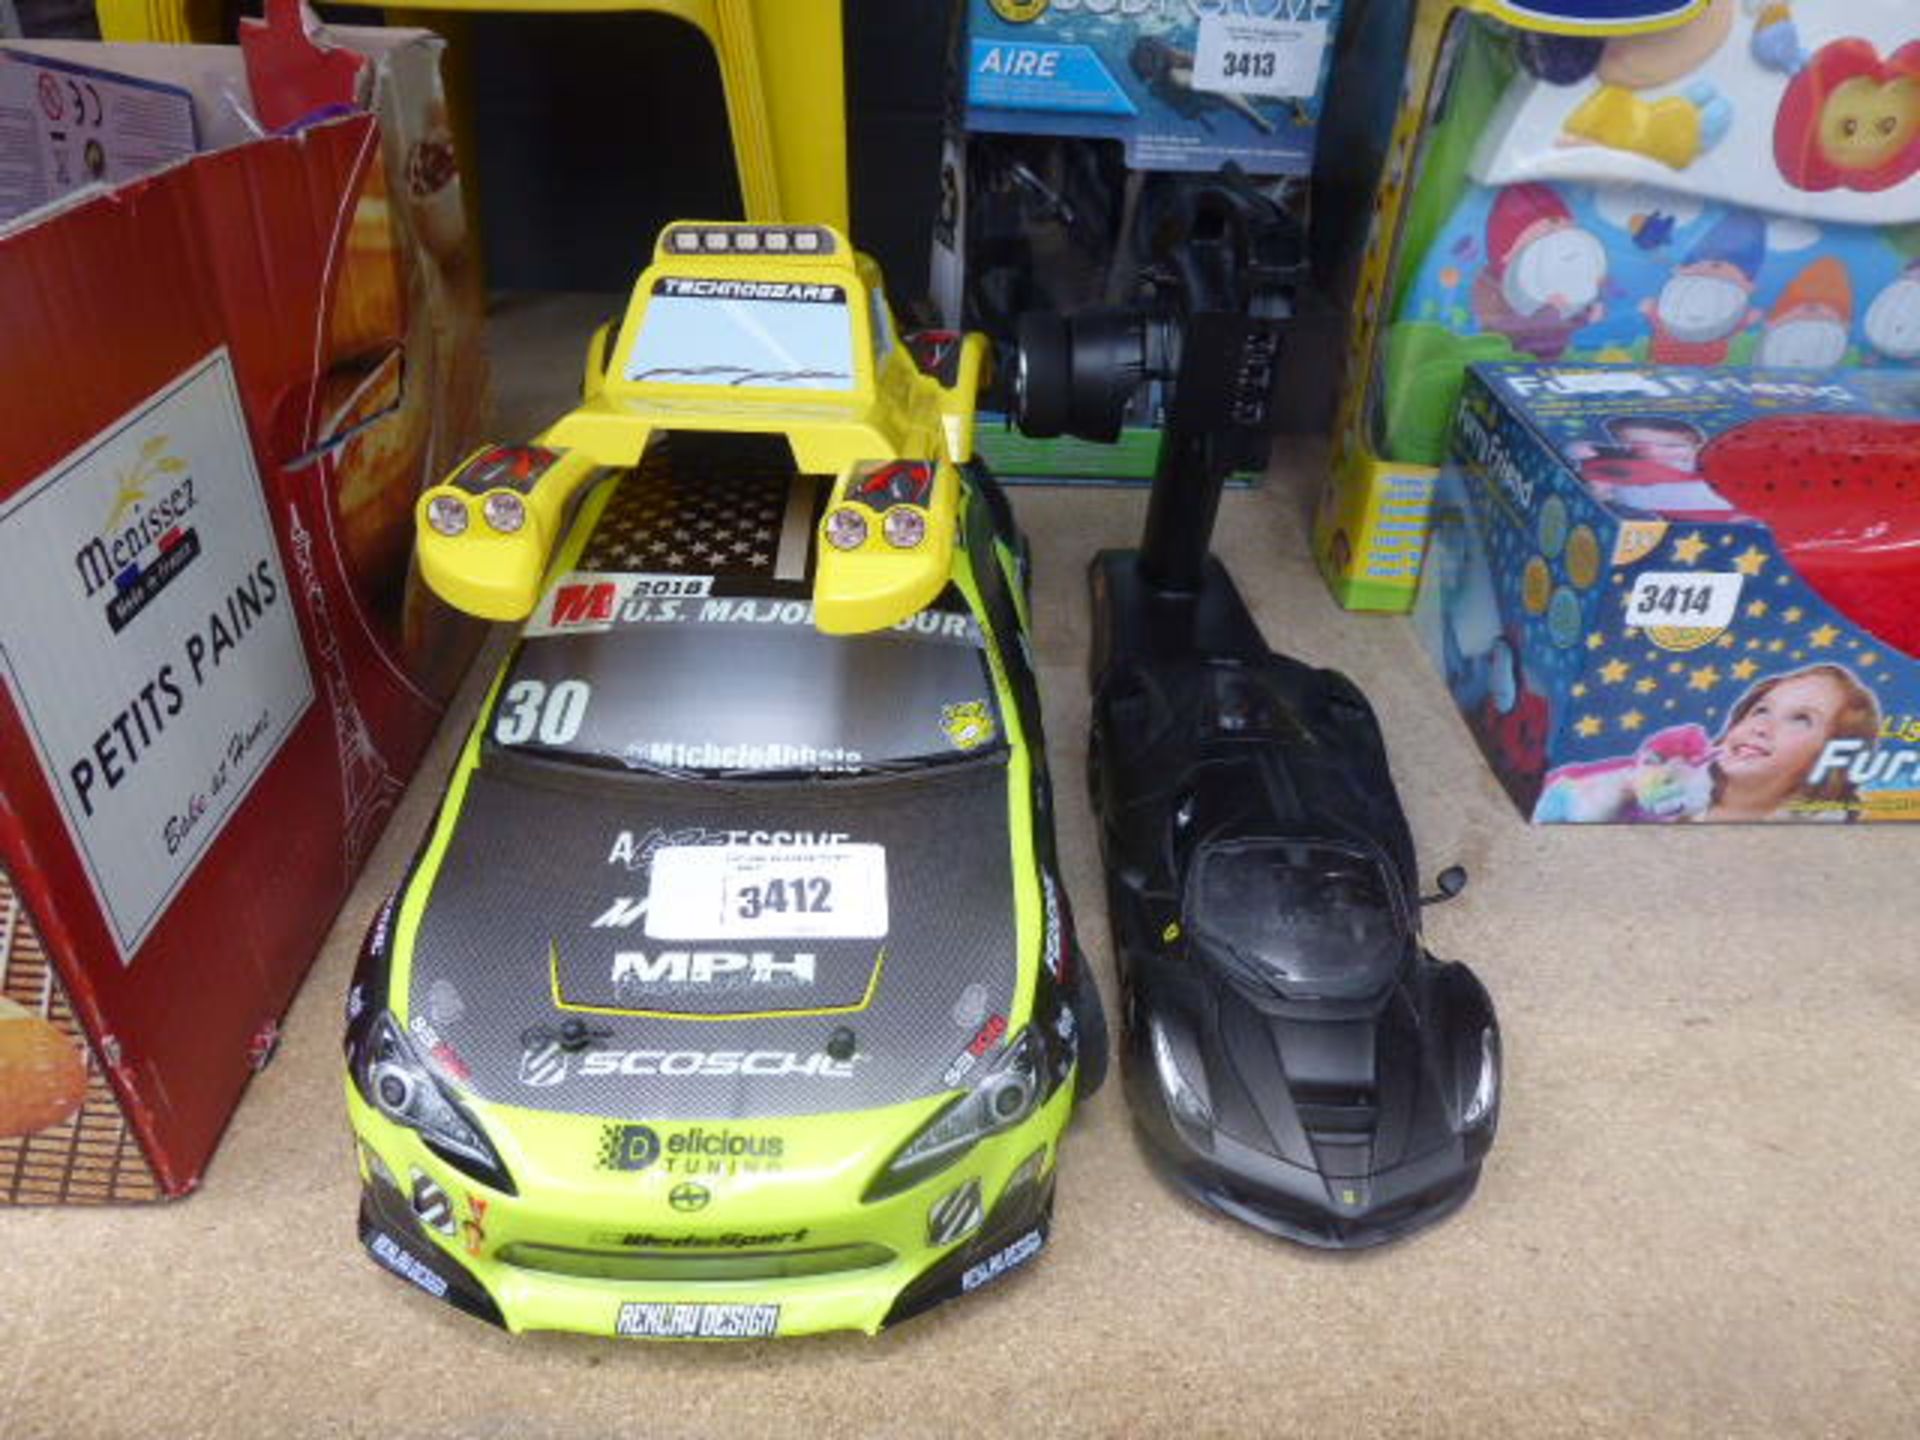 Remote control car plus another model car